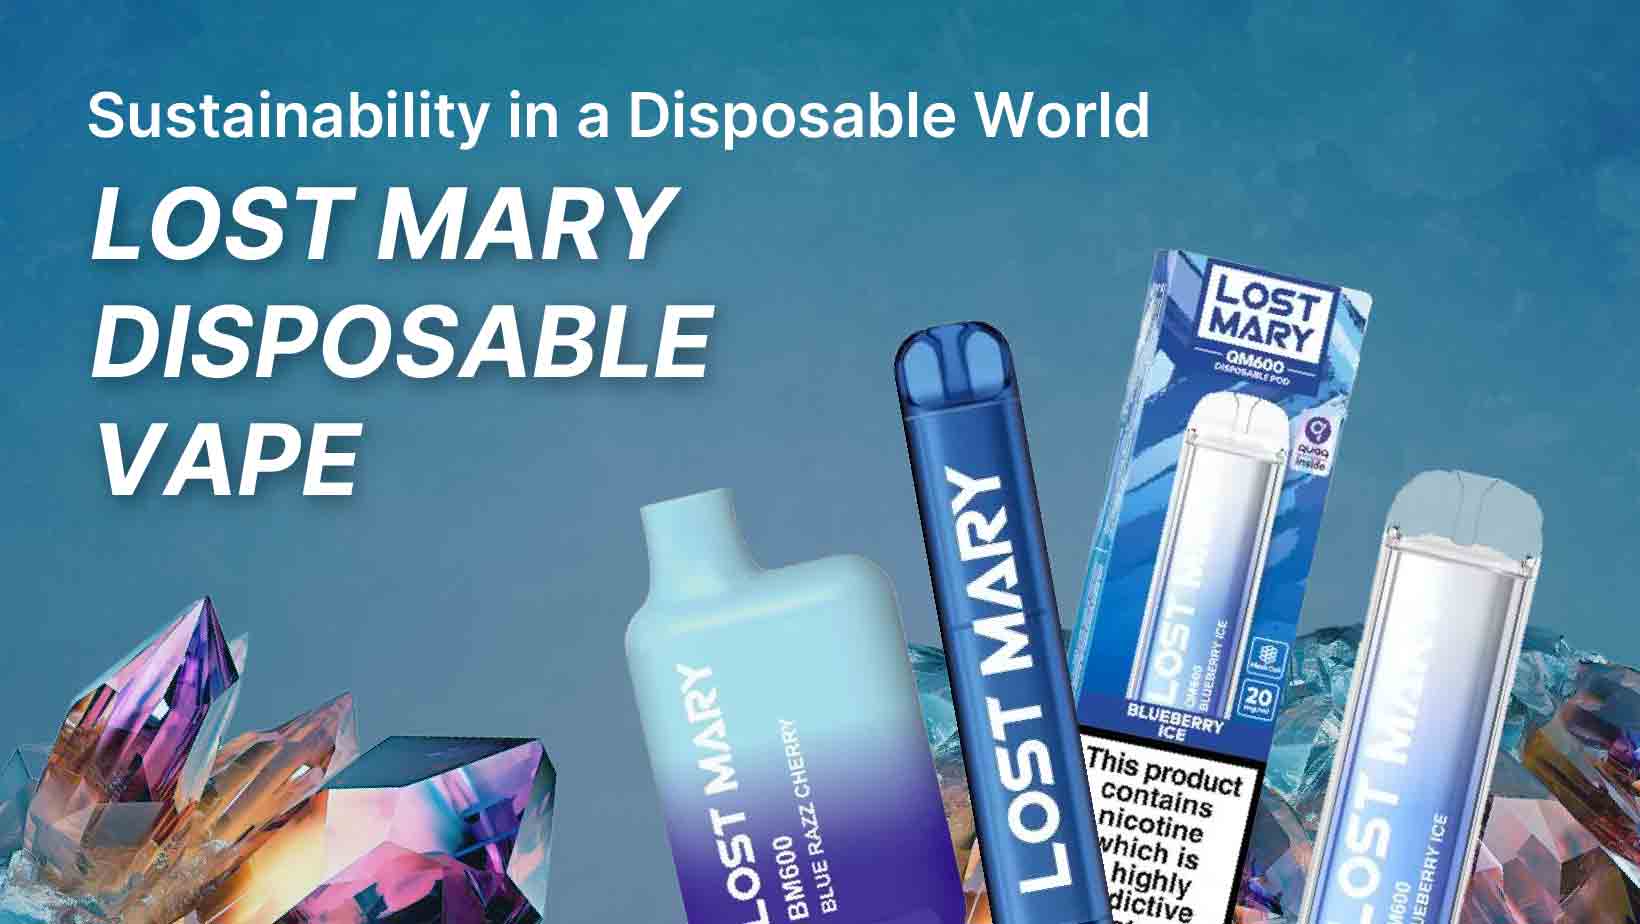 Lost Mary Disposable Vape: Sustainability In A Disposable World